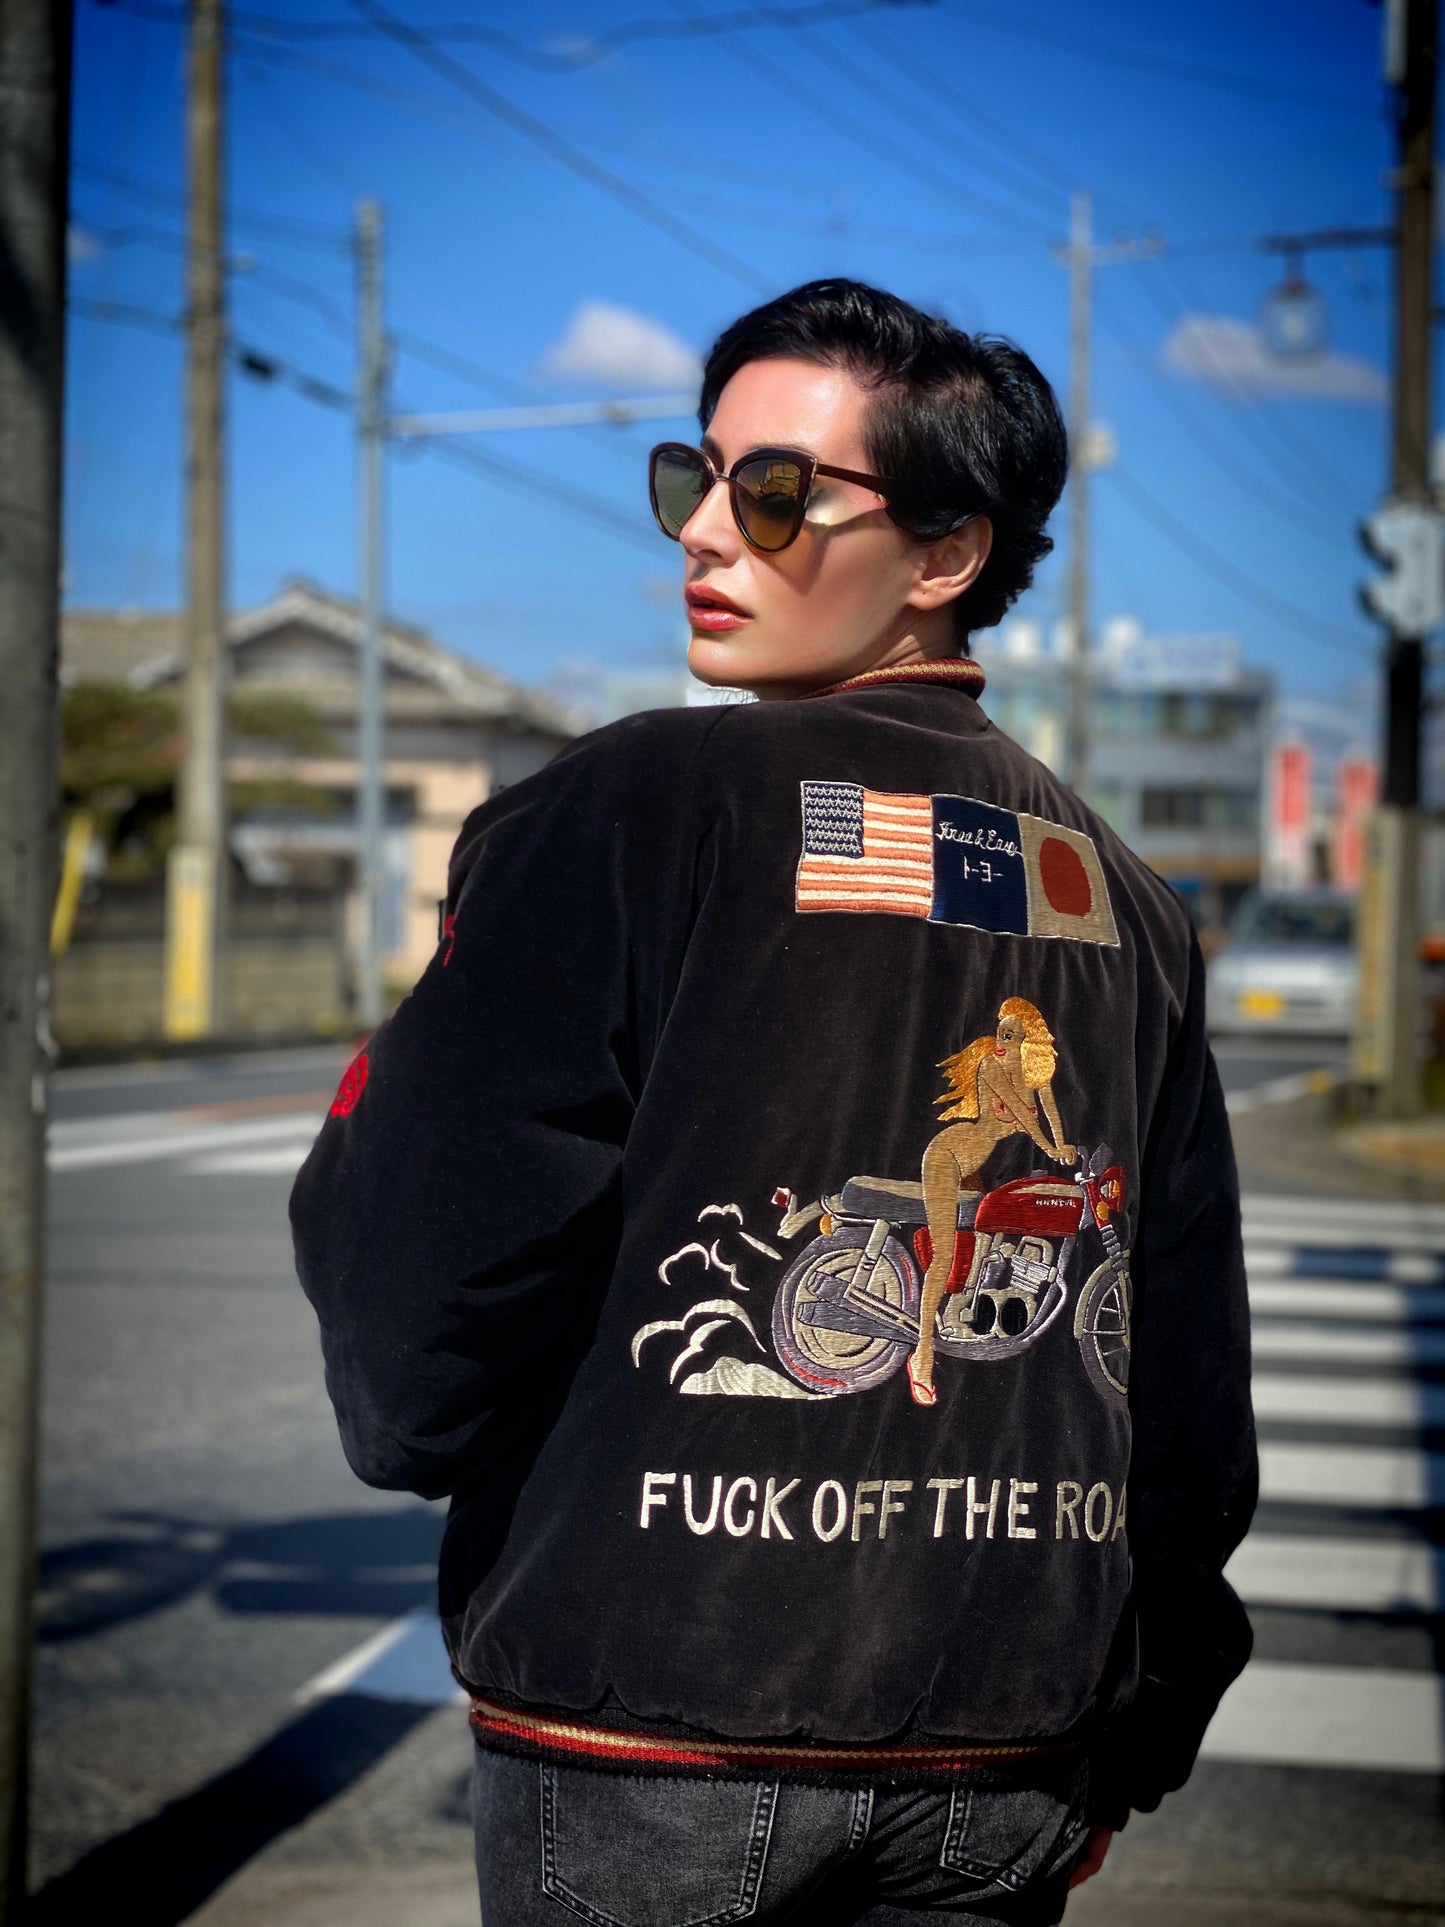 FREE & EASY Vintage Magazine Collaboration Japanese TAILOR TOYO Free and Easy Banzai Pipeline Flags Nude Lady Biker Hotrod Americana Reversible Yokosuka Jumper Pinup Pin-up Shunga Tattoo Art Embroidered Embroidery Sukajan Souvenir Jacket ( Size : L )